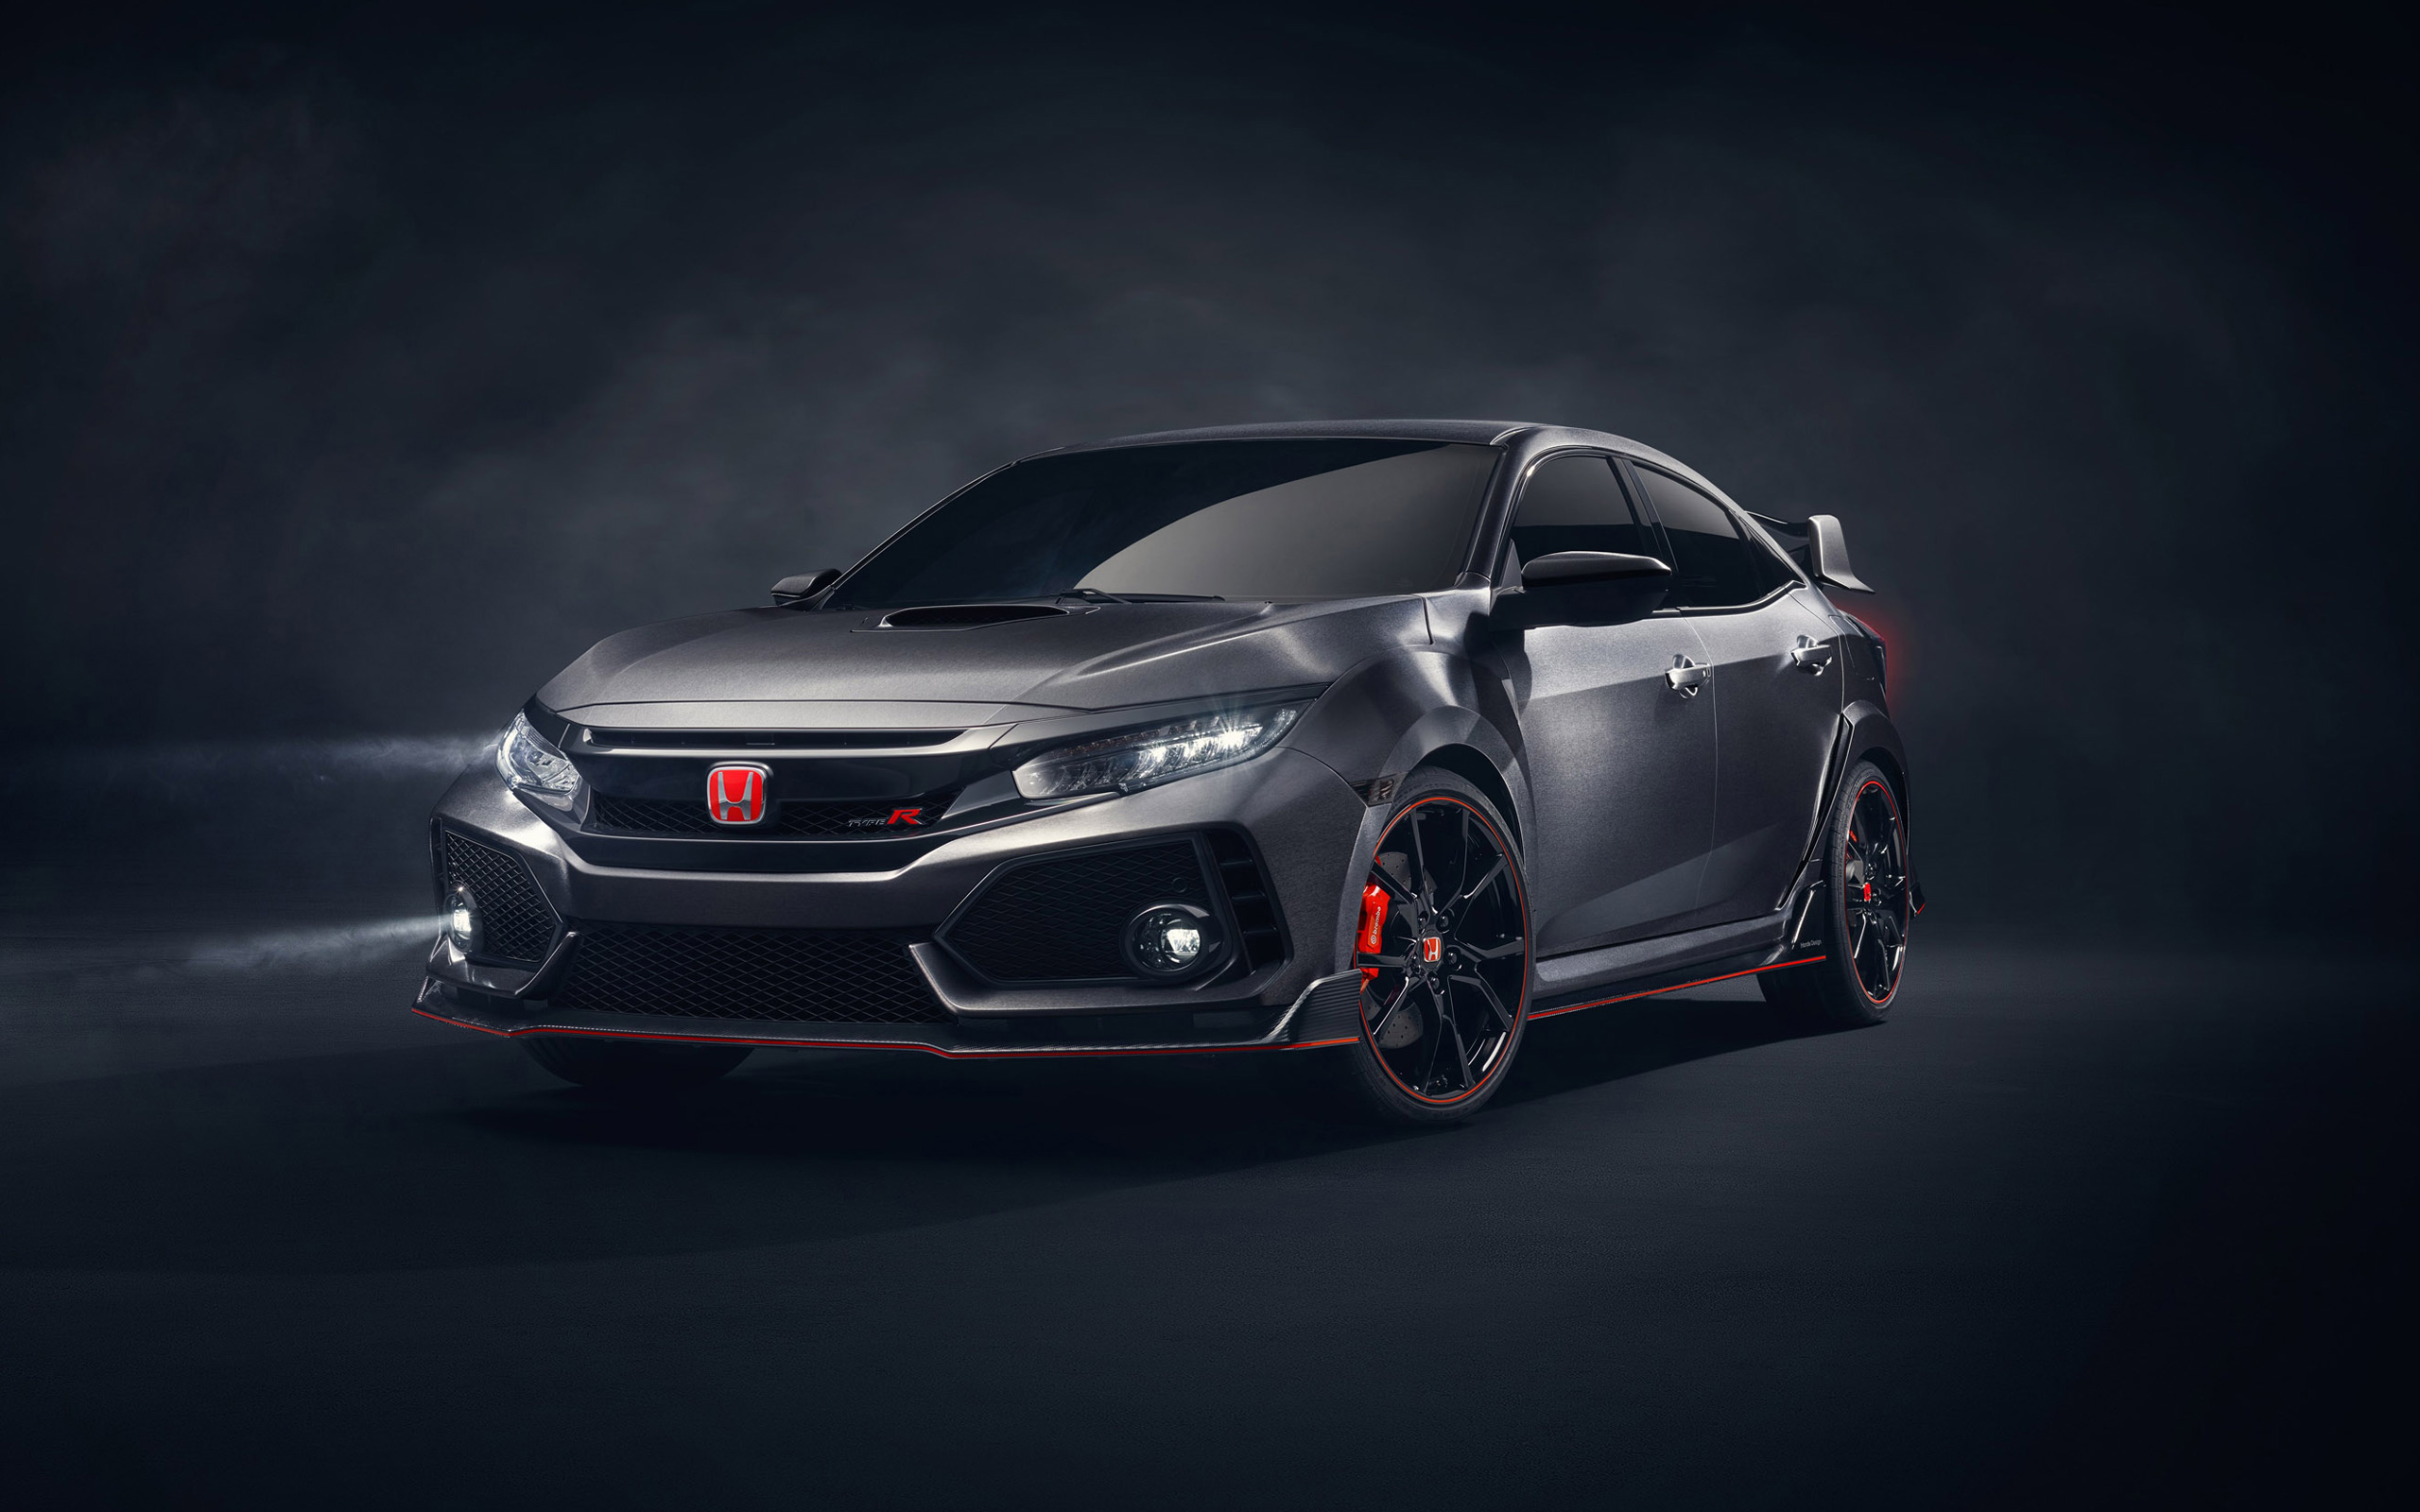 Honda Civic Type R Pictures  Download Free Images on Unsplash